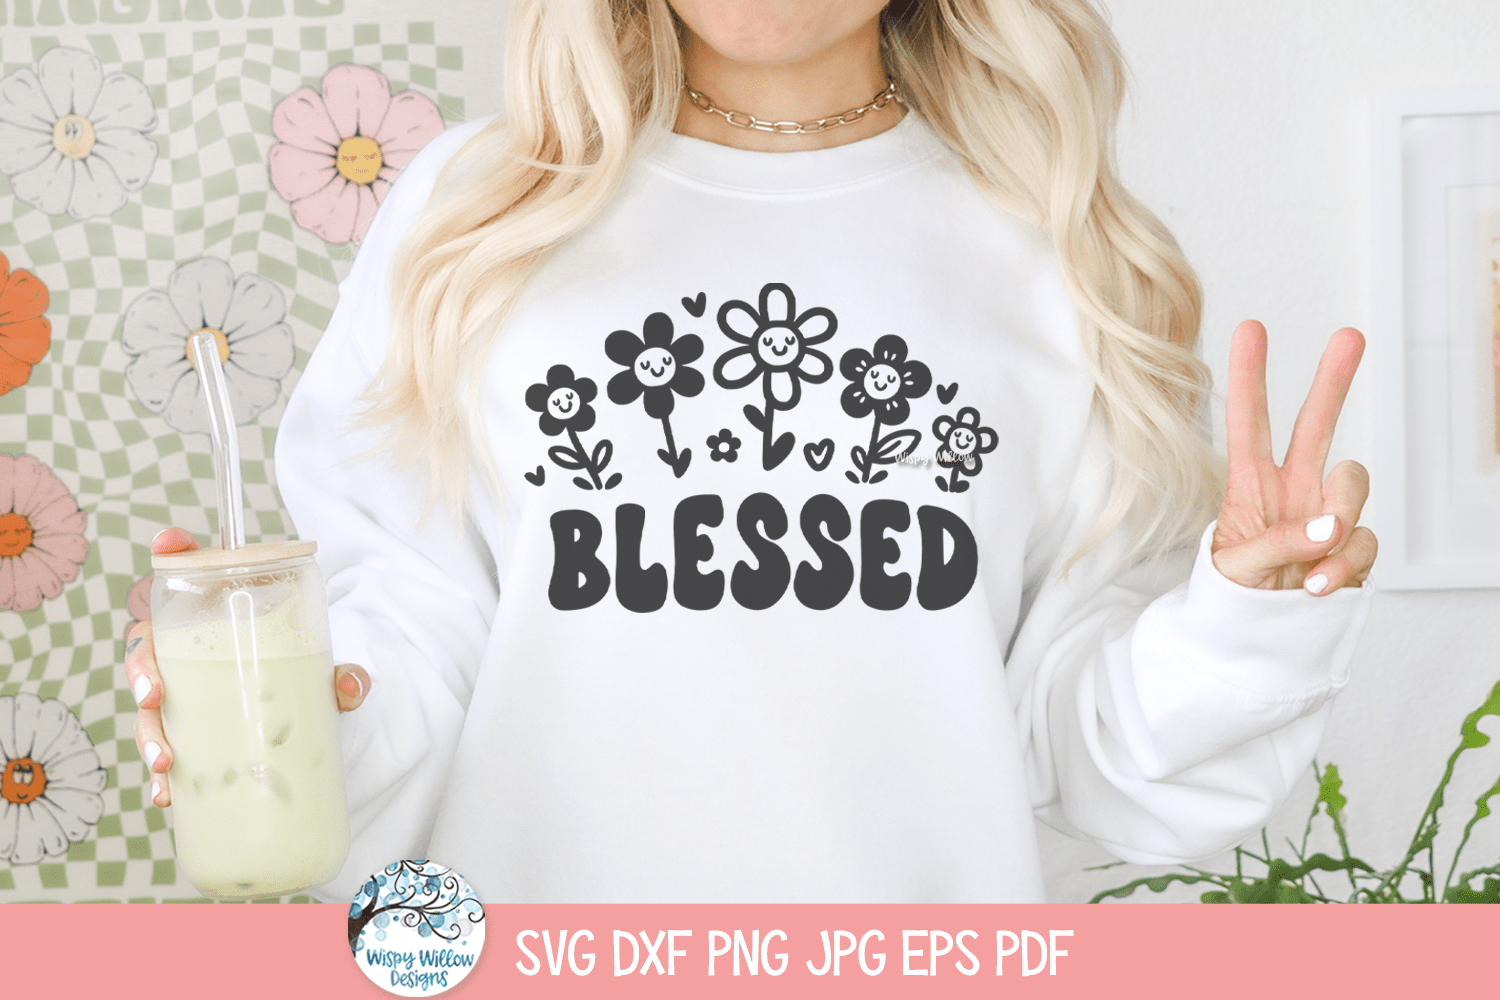 Blessed SVG | Playful and Positive Flower Design Wispy Willow Designs Company